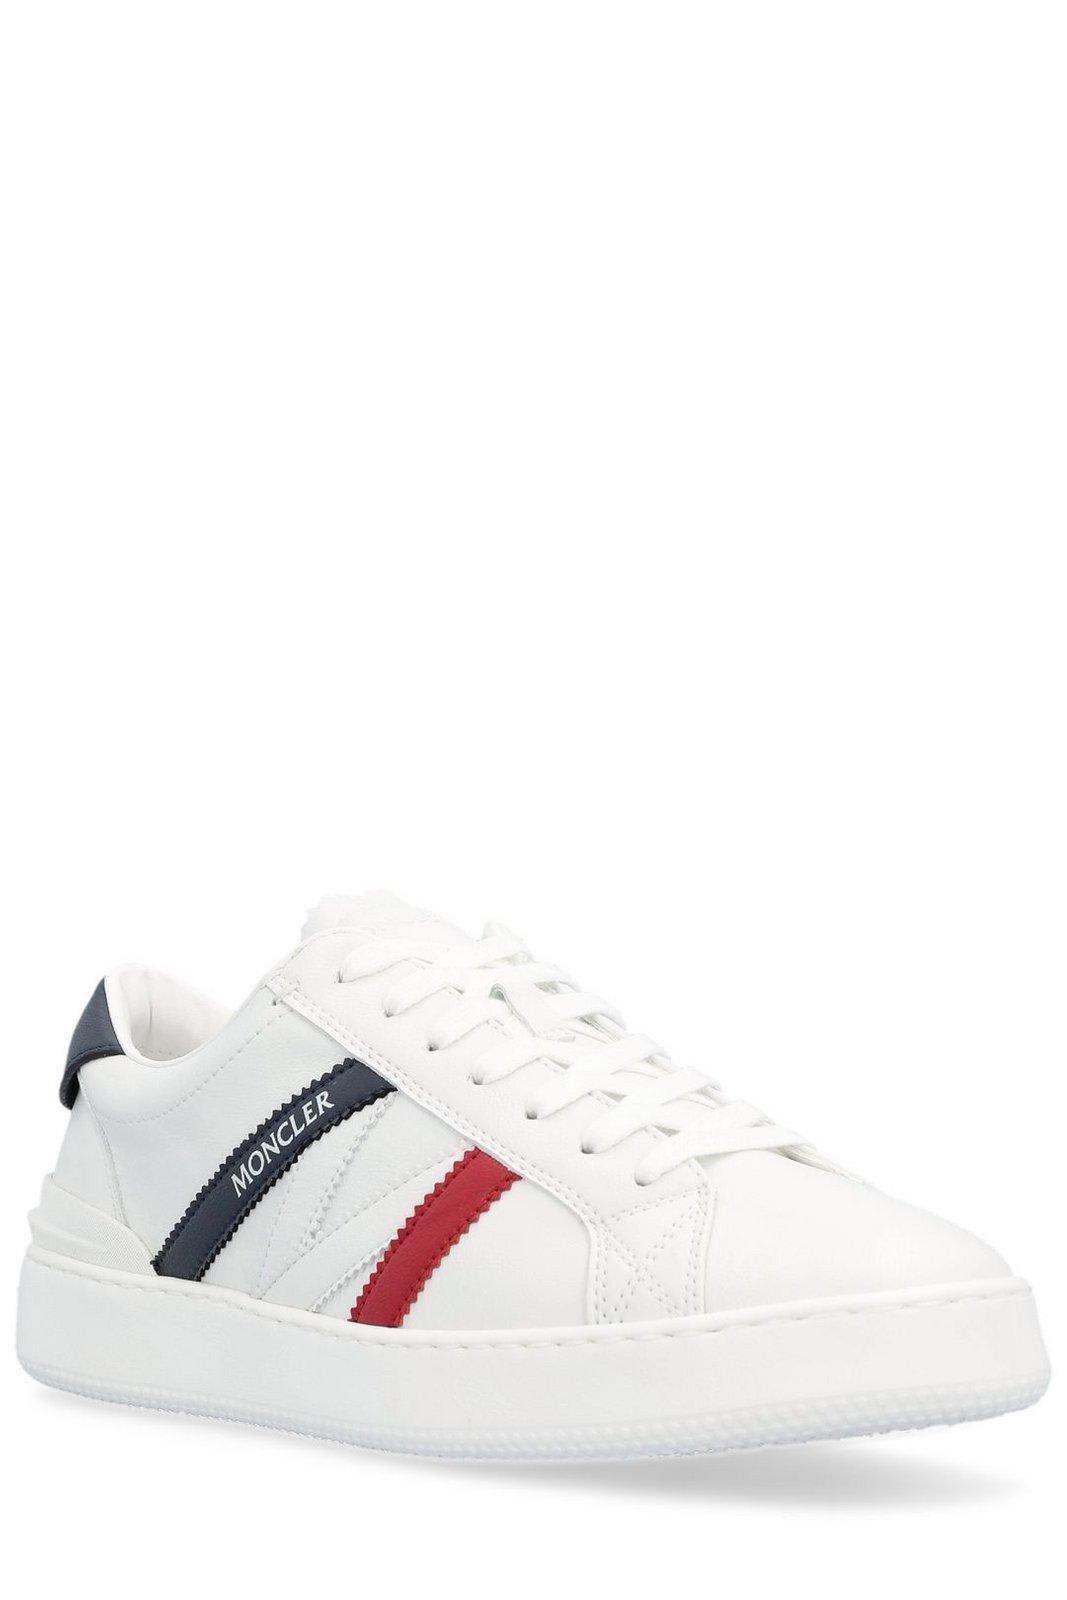 Moncler Logo Printed Lace-up Sneakers for Men | Lyst